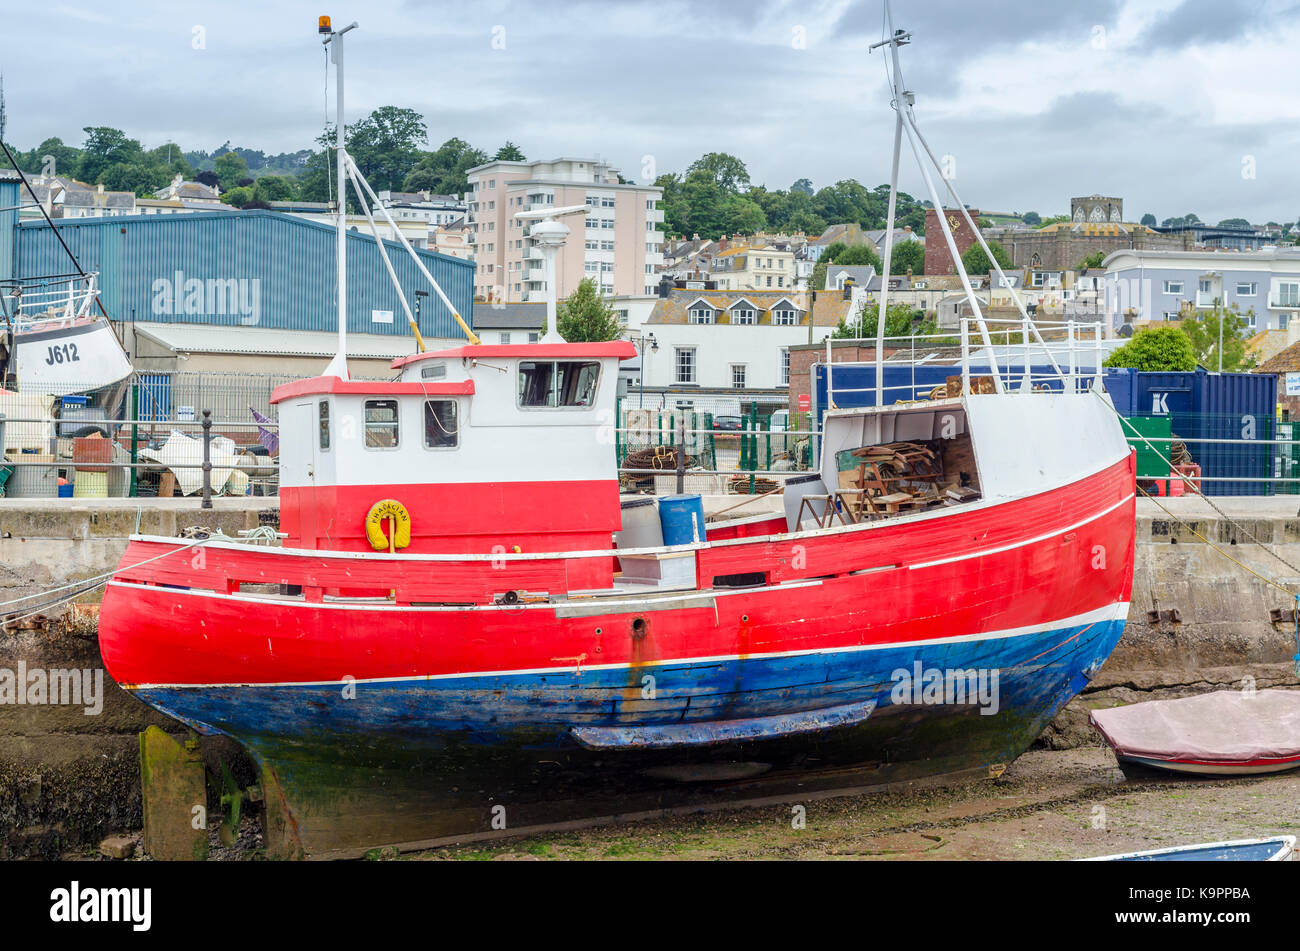 Boat in a dry harbour dry dock, Teignmouth, Devon, England, UK Stock Photo